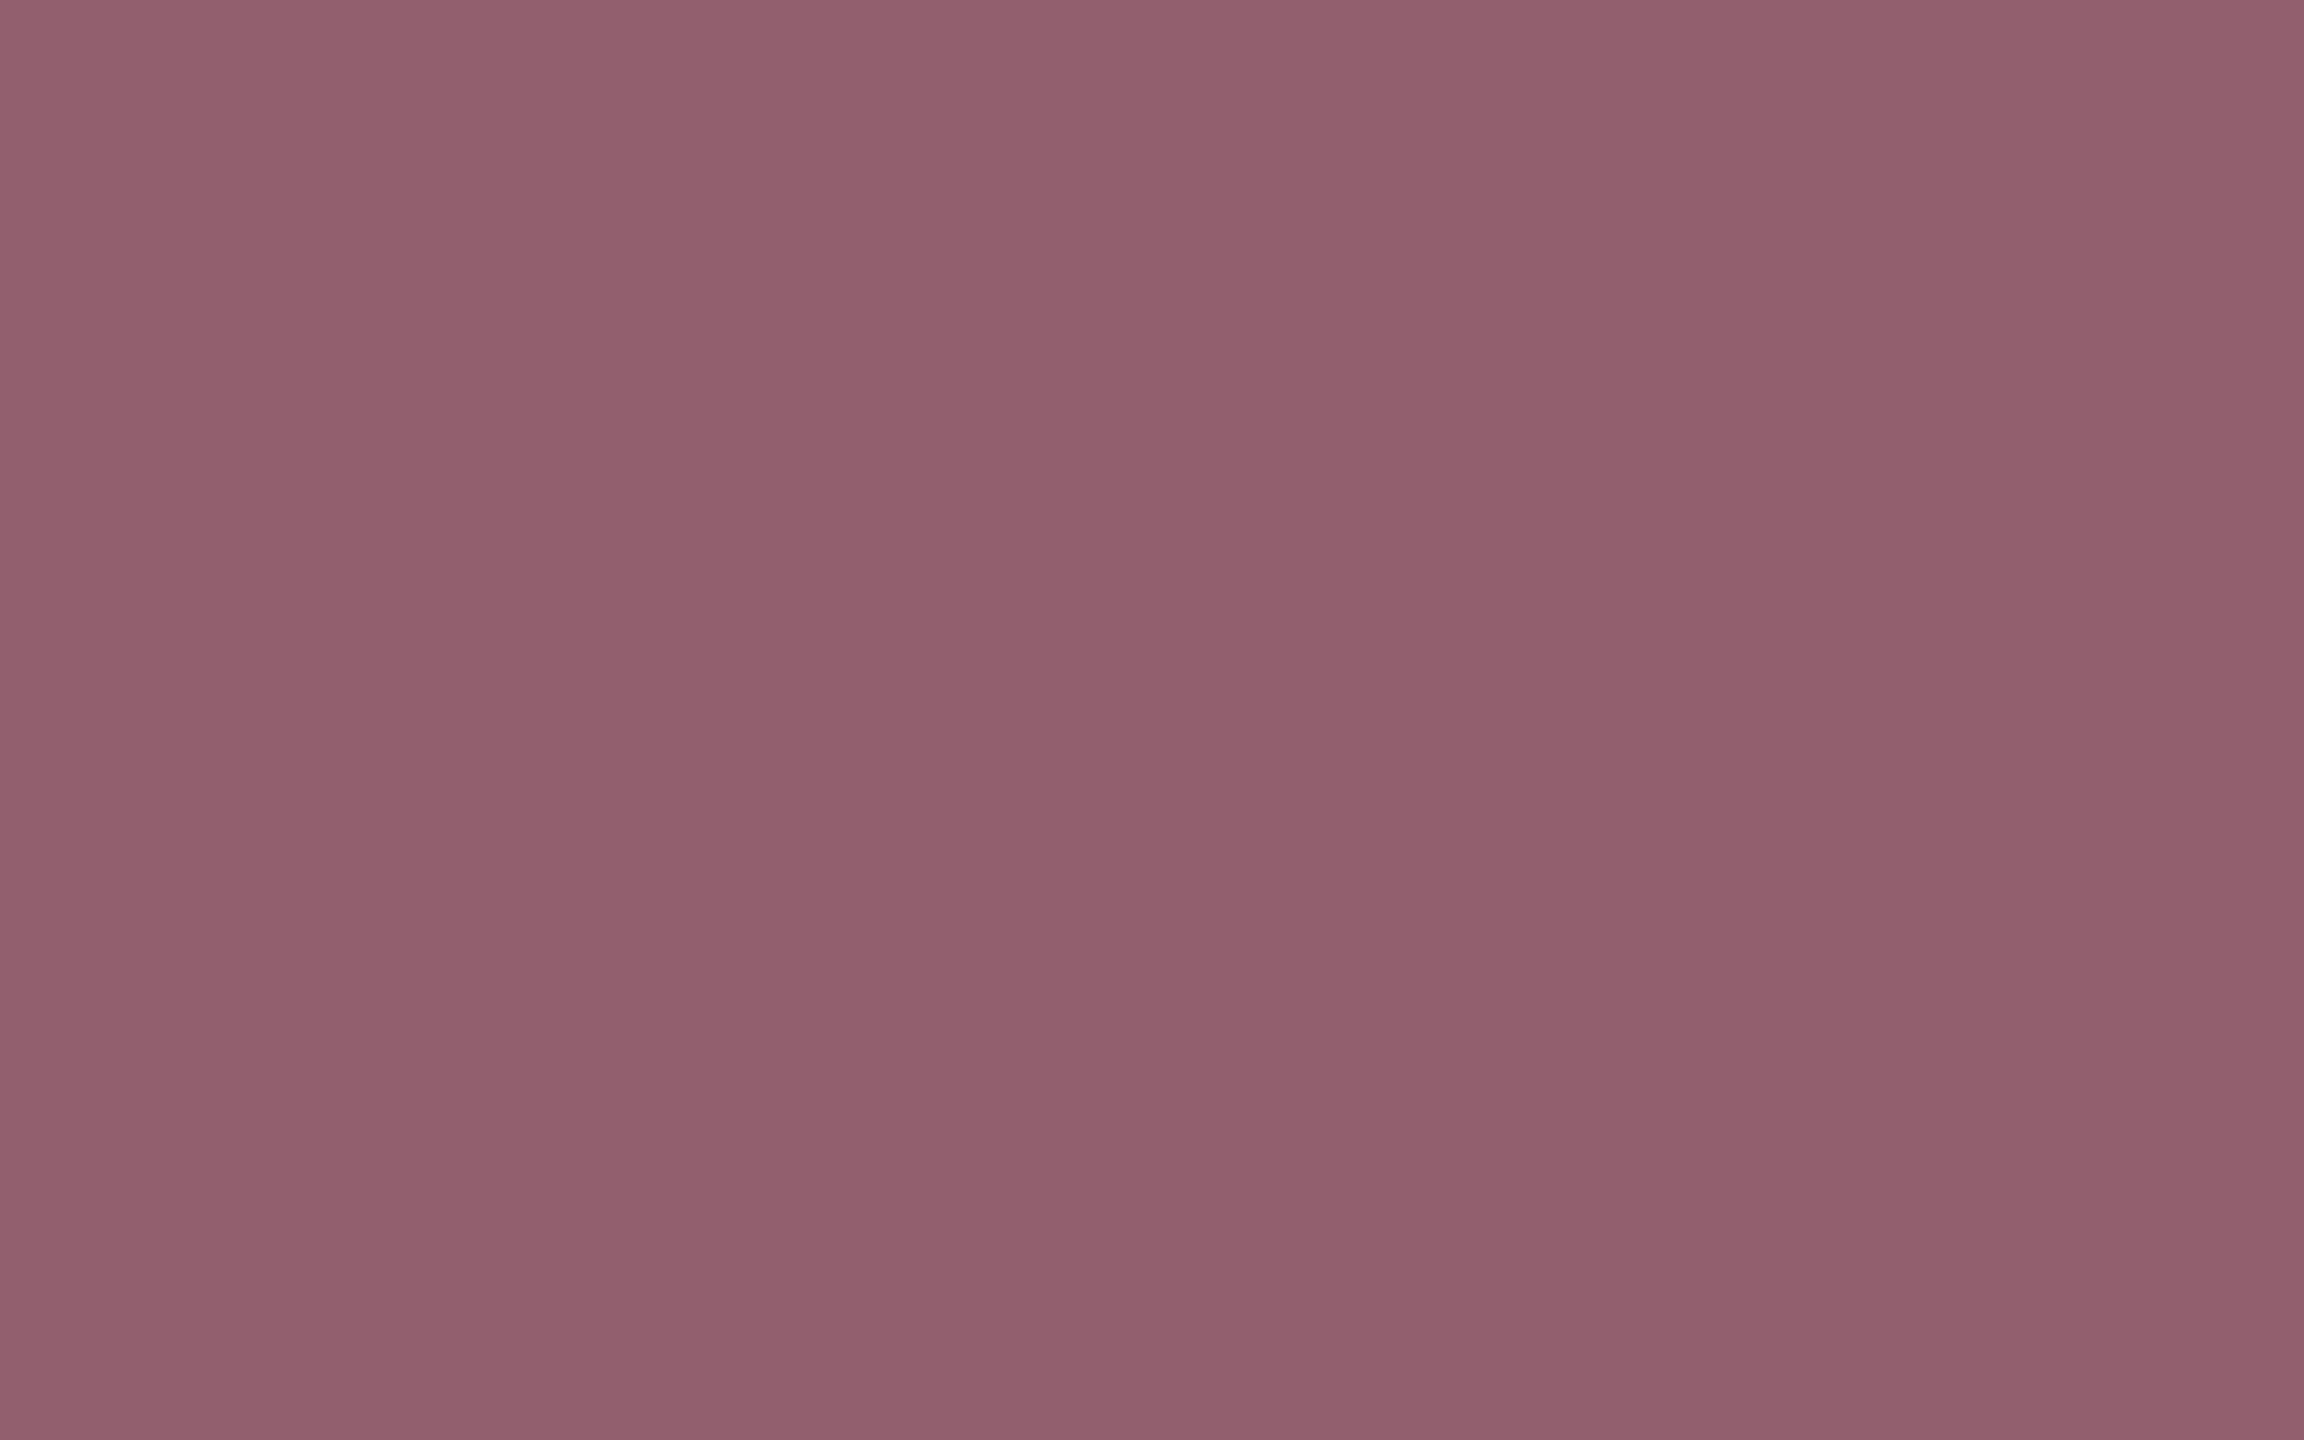 2304x1440 Mauve Taupe Solid Color Background